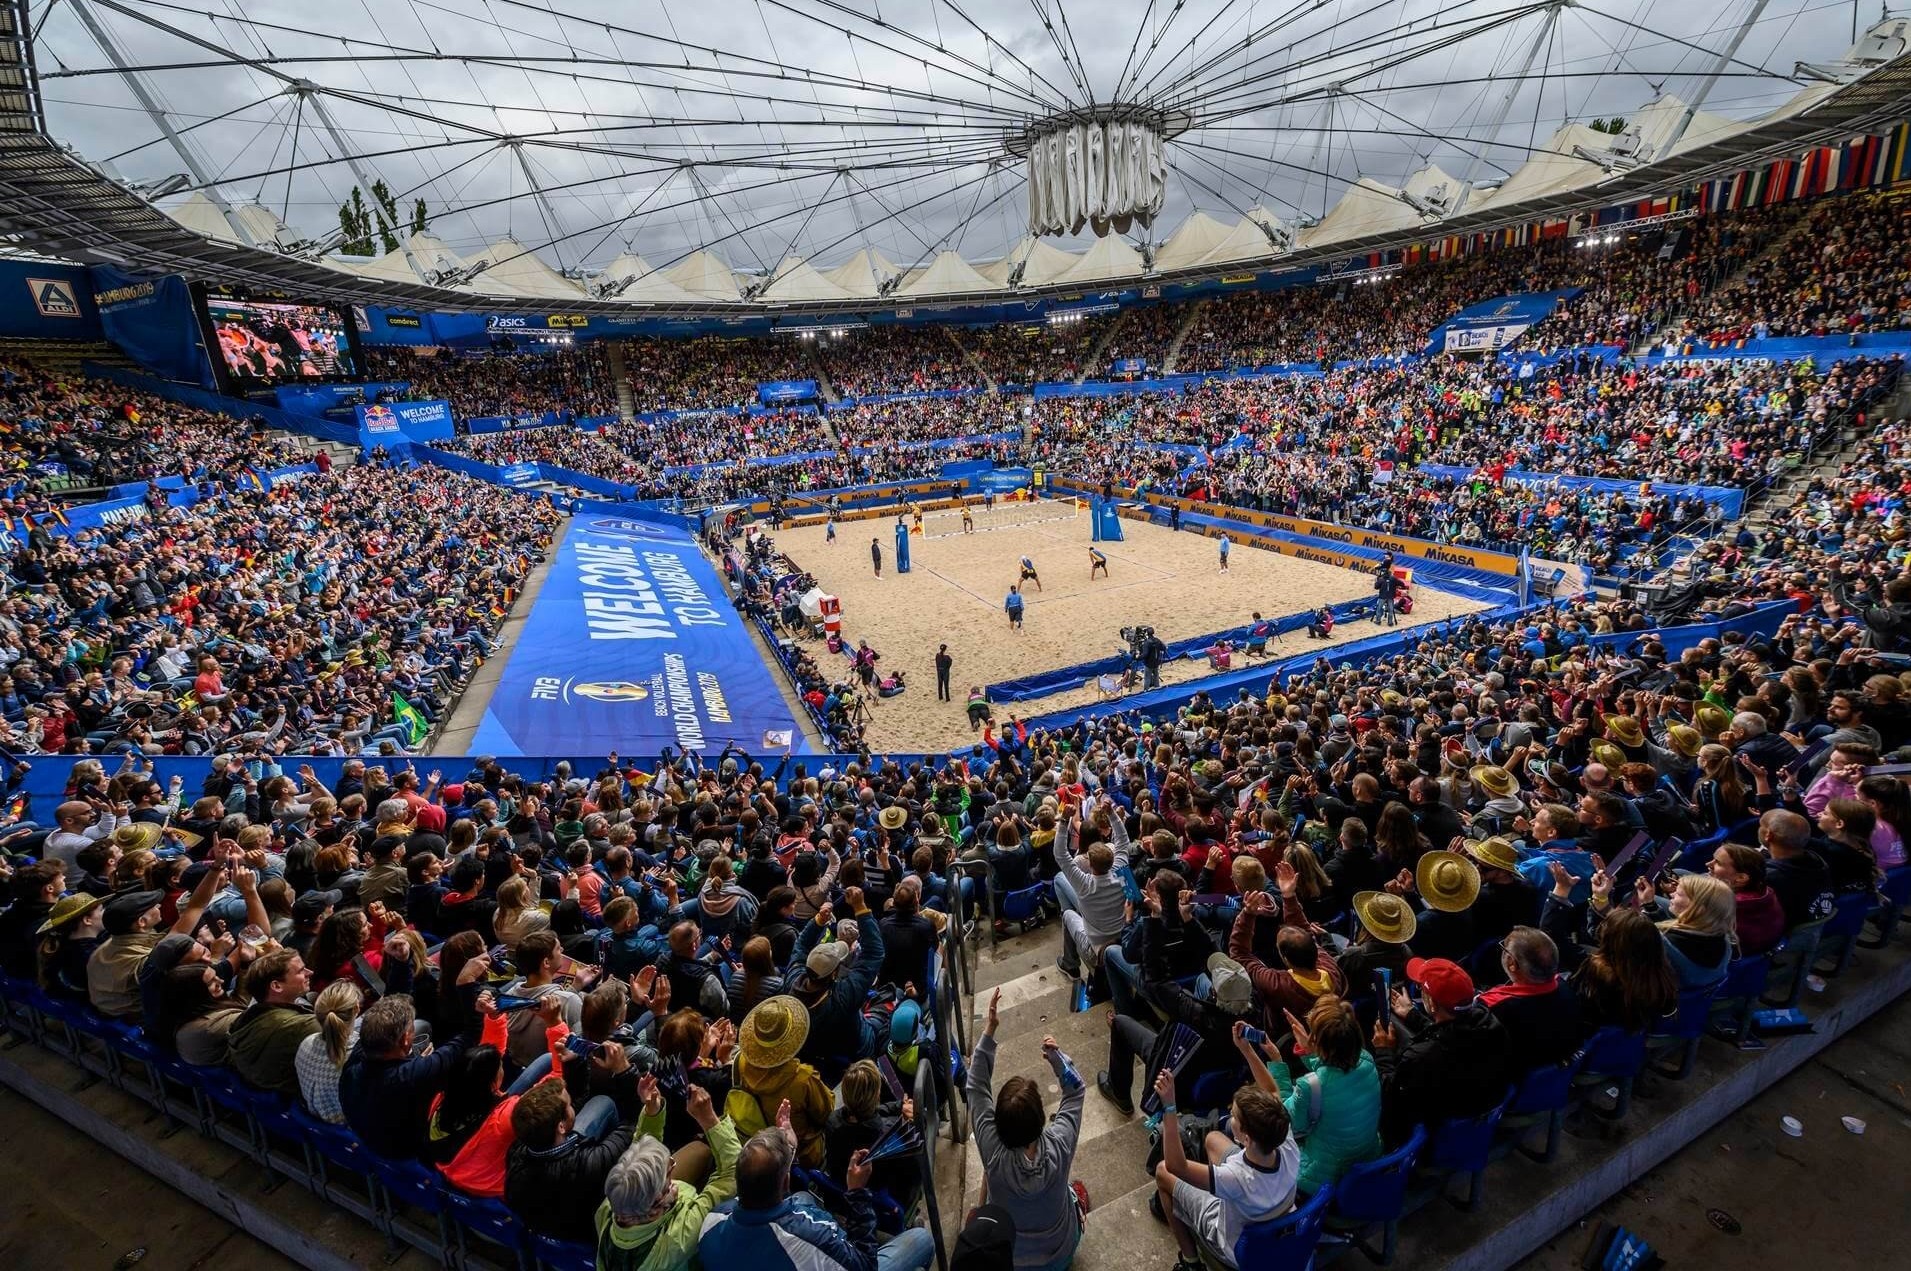 The 2019 World Championships in Hamburg was one of the biggest tournaments in beach volleyball history